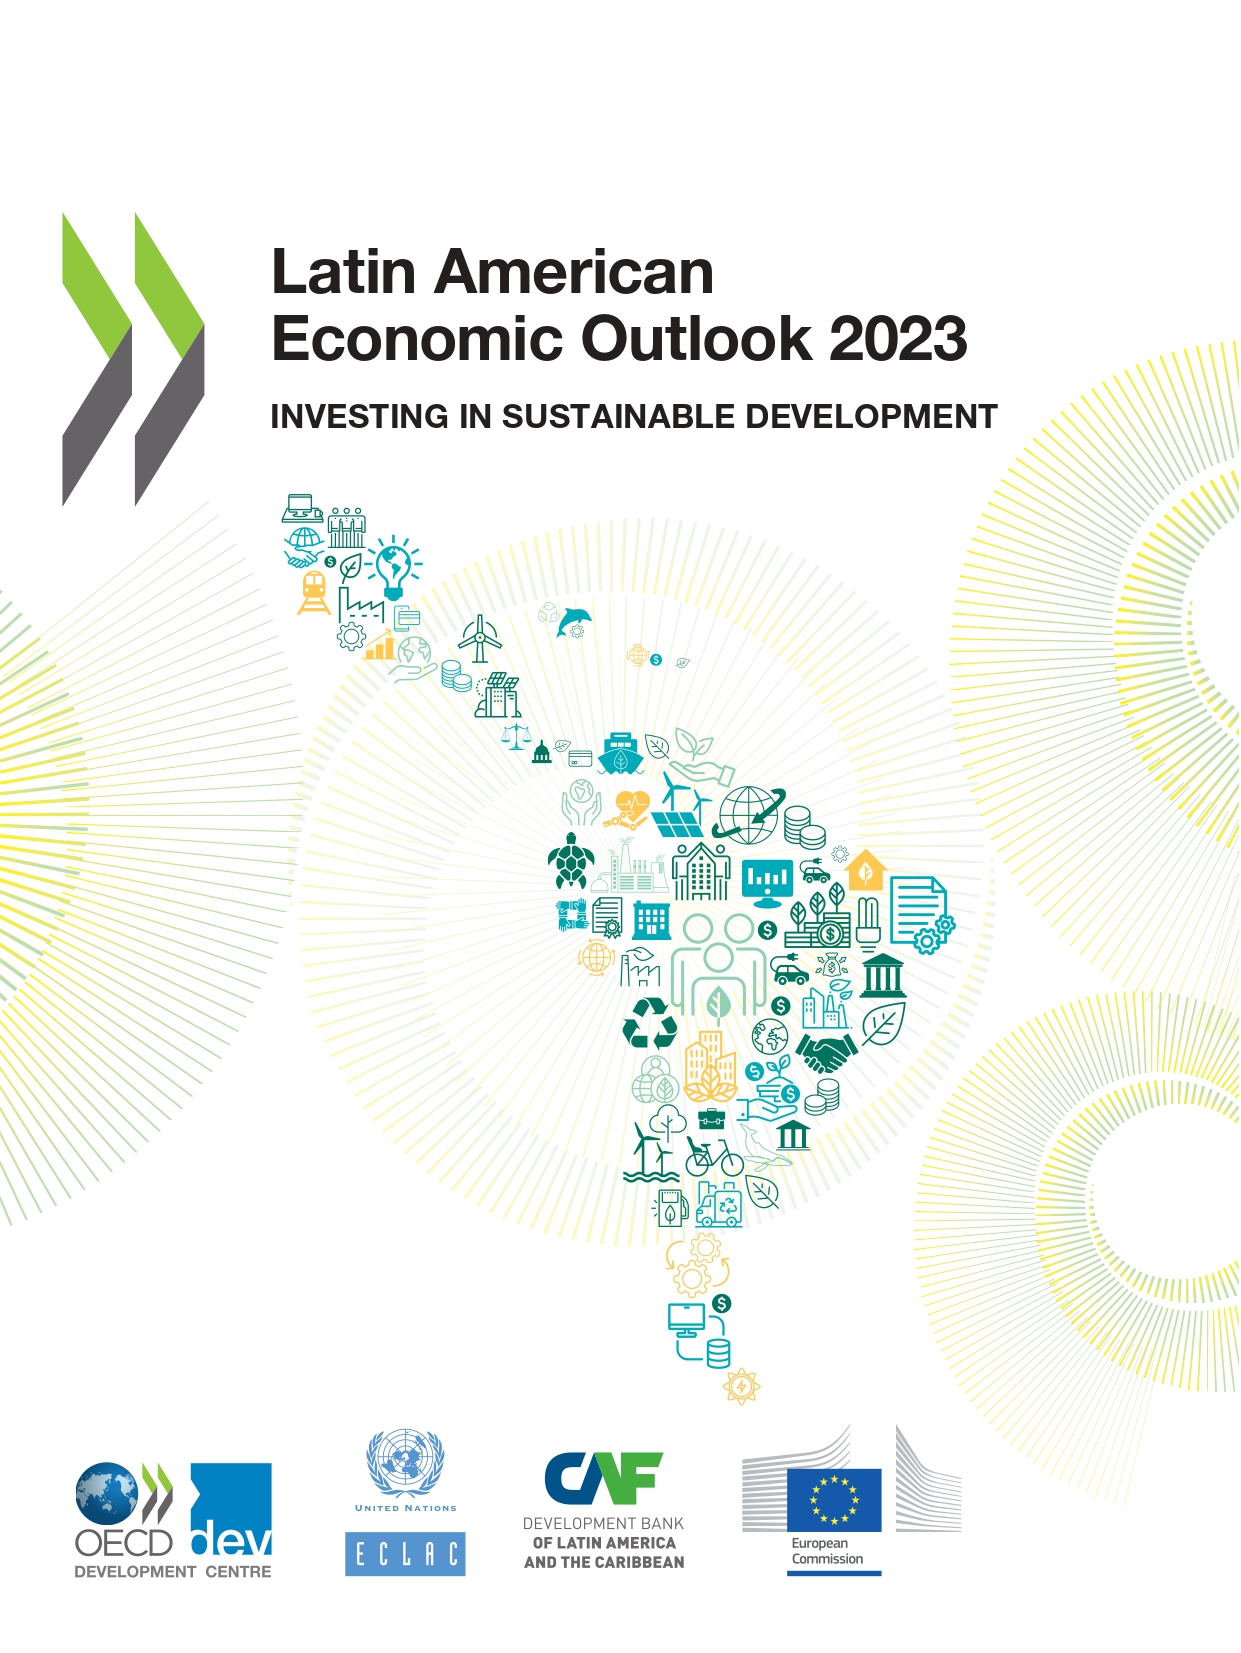 Latin American Economic Outlook 2023. Investing in a suitable development